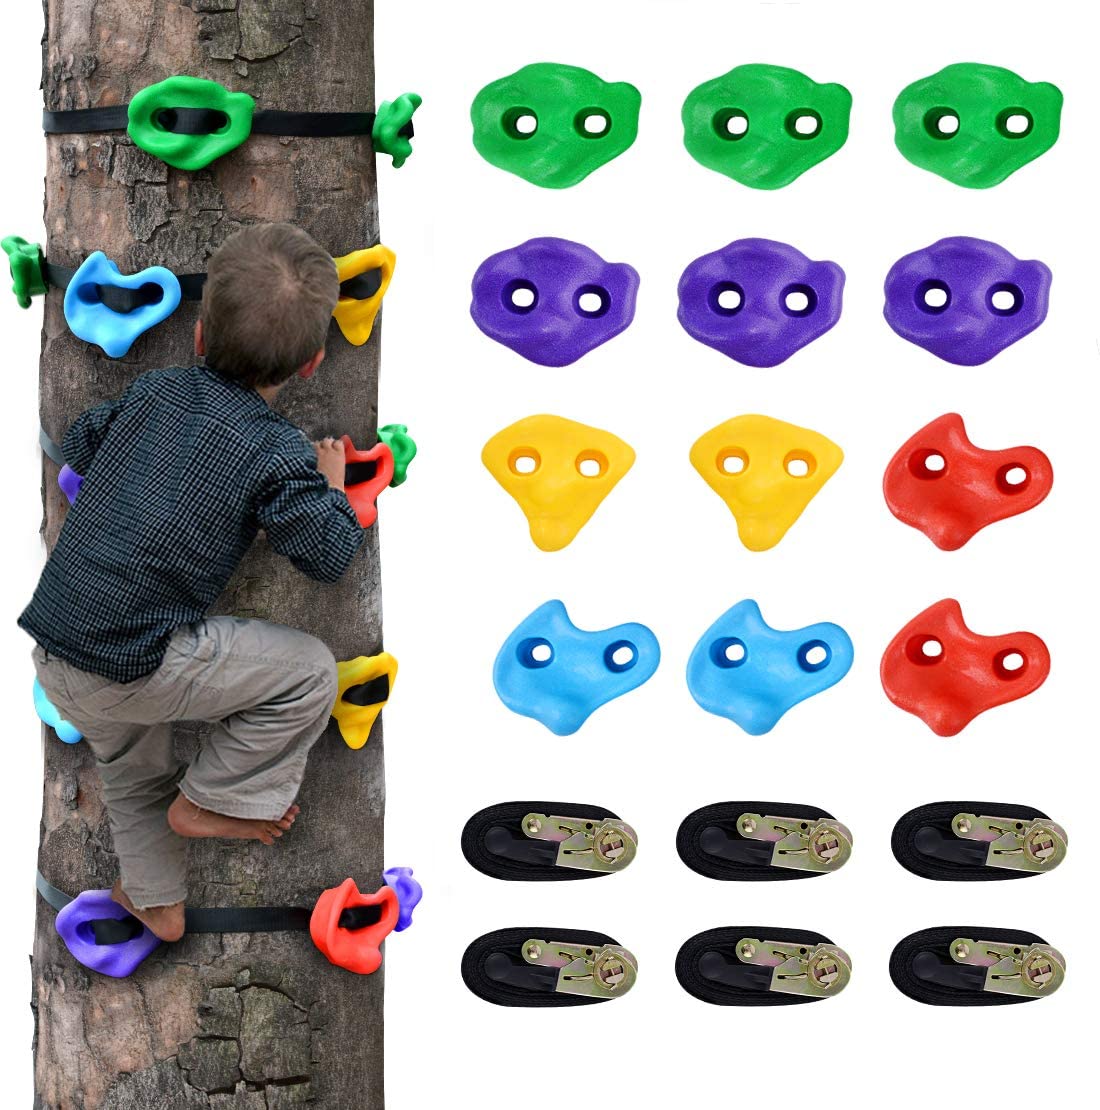 topnew-tree-climbing-holds-for-kids-set